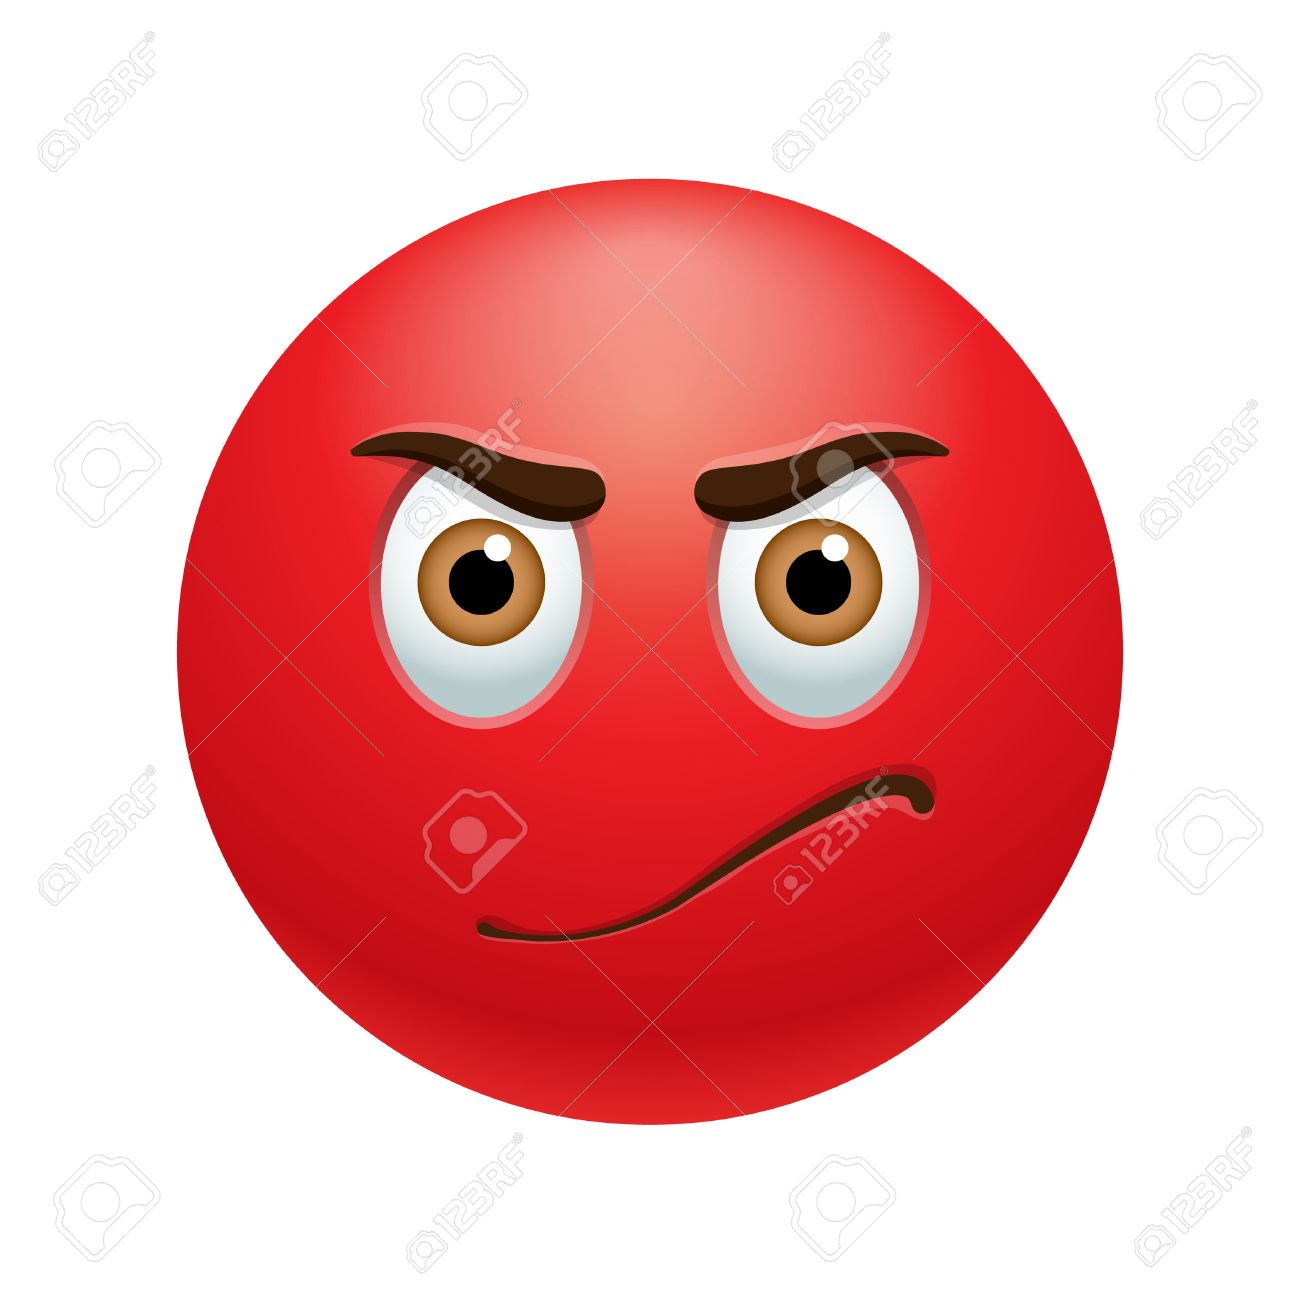 Emotional clipart angry.